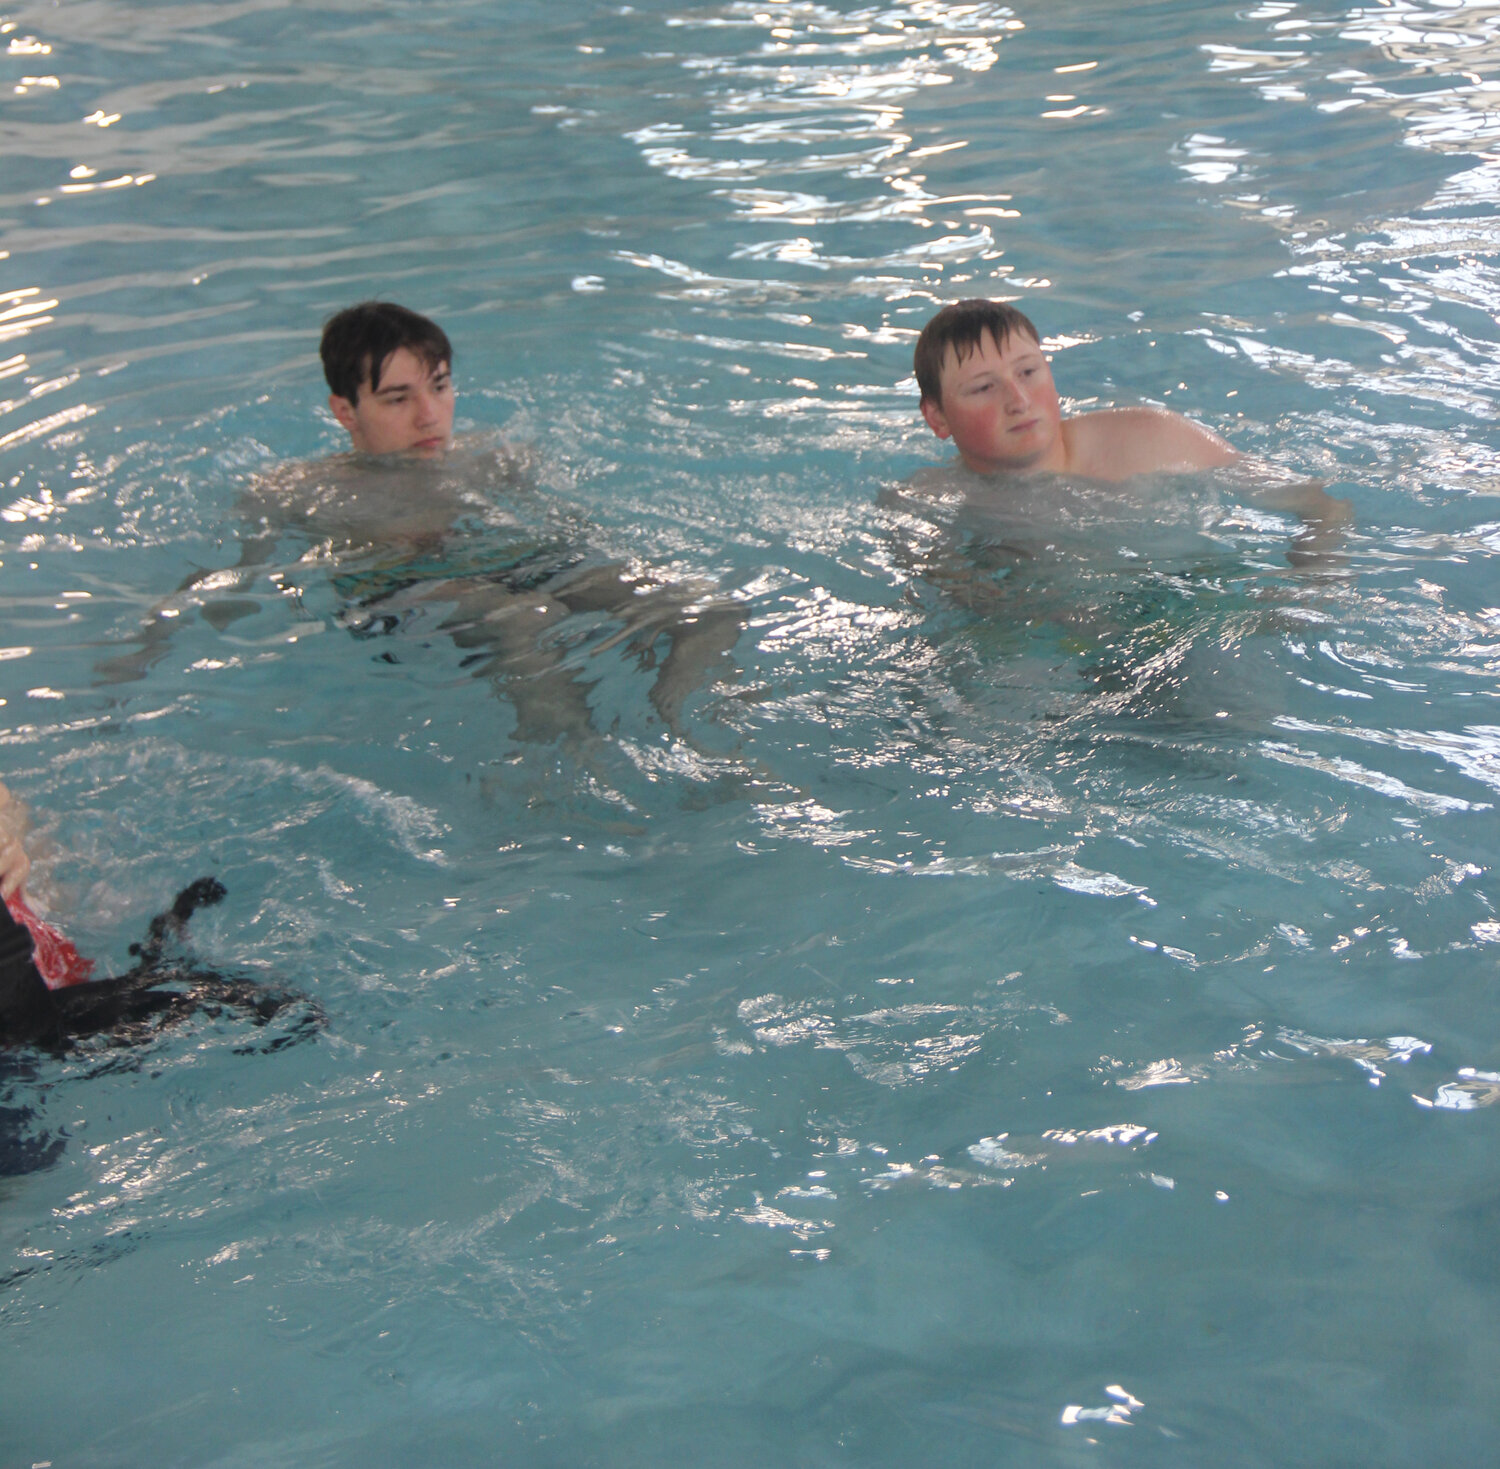 Jacob Nagle and Cooper Stone listen to instruction during lifeguard training class.